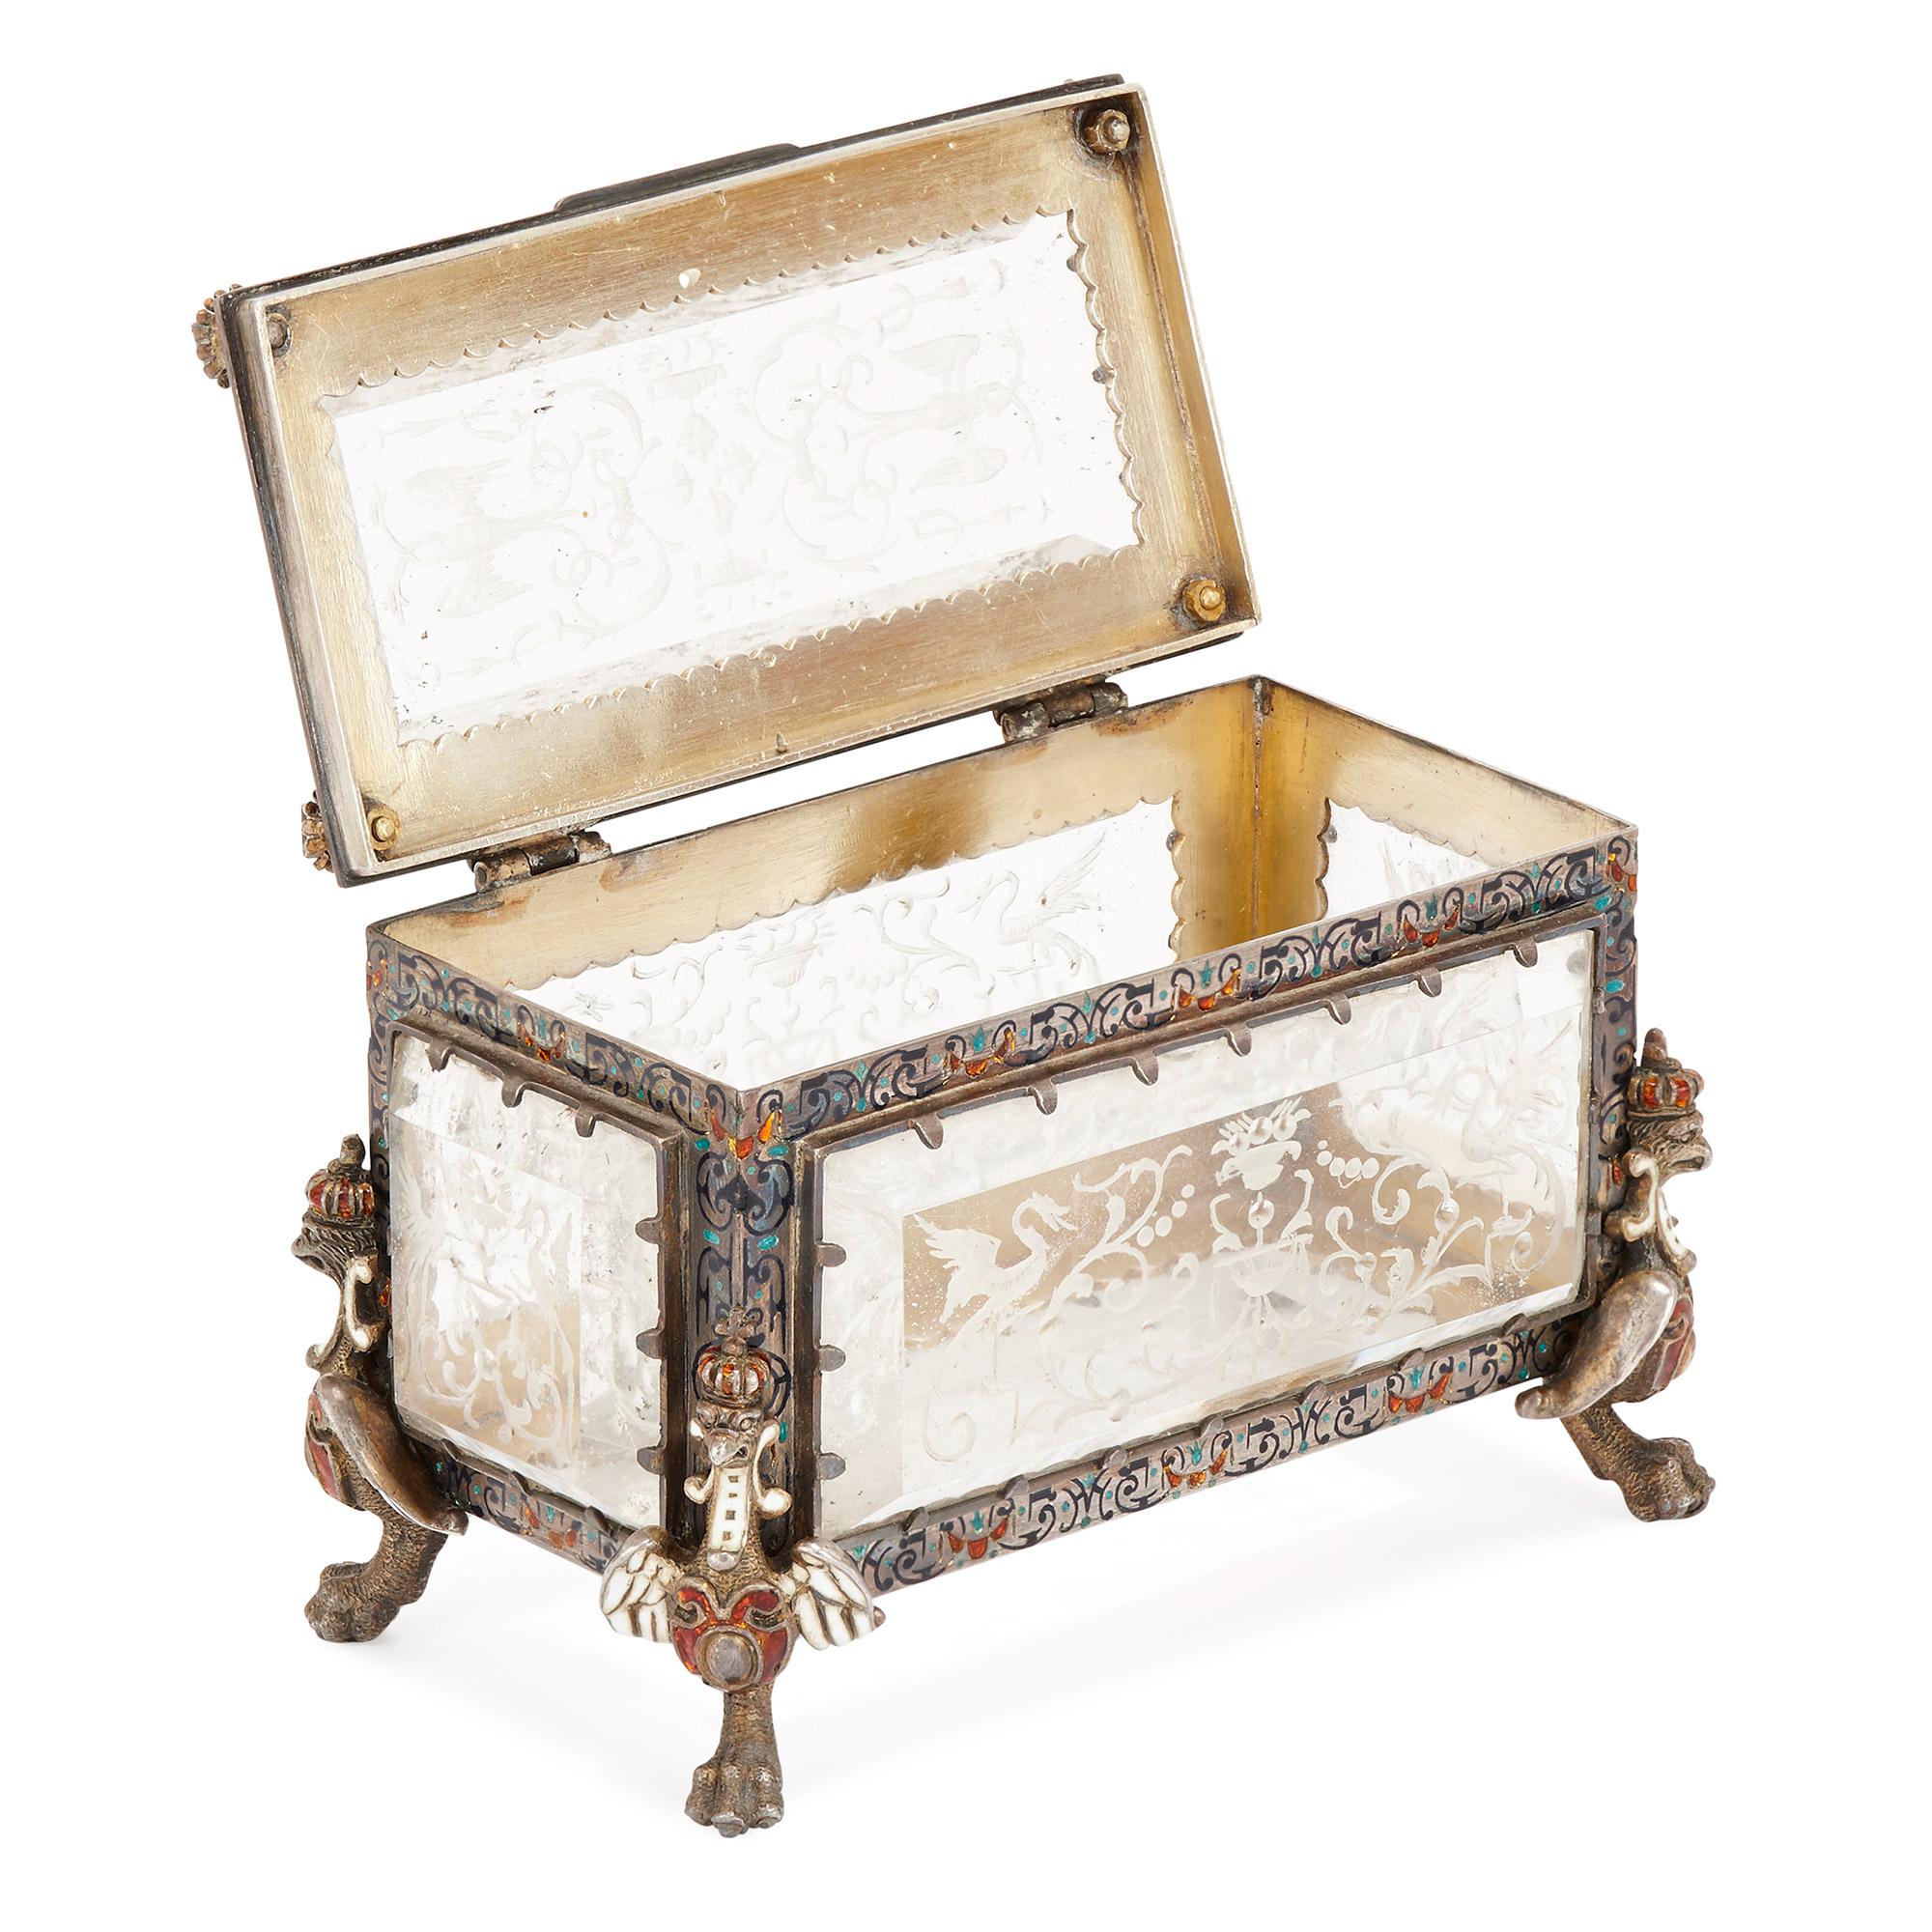 Renaissance Antique Viennese Rock Crystal and Enamelled Silver Toilet Set in Wooden Case For Sale